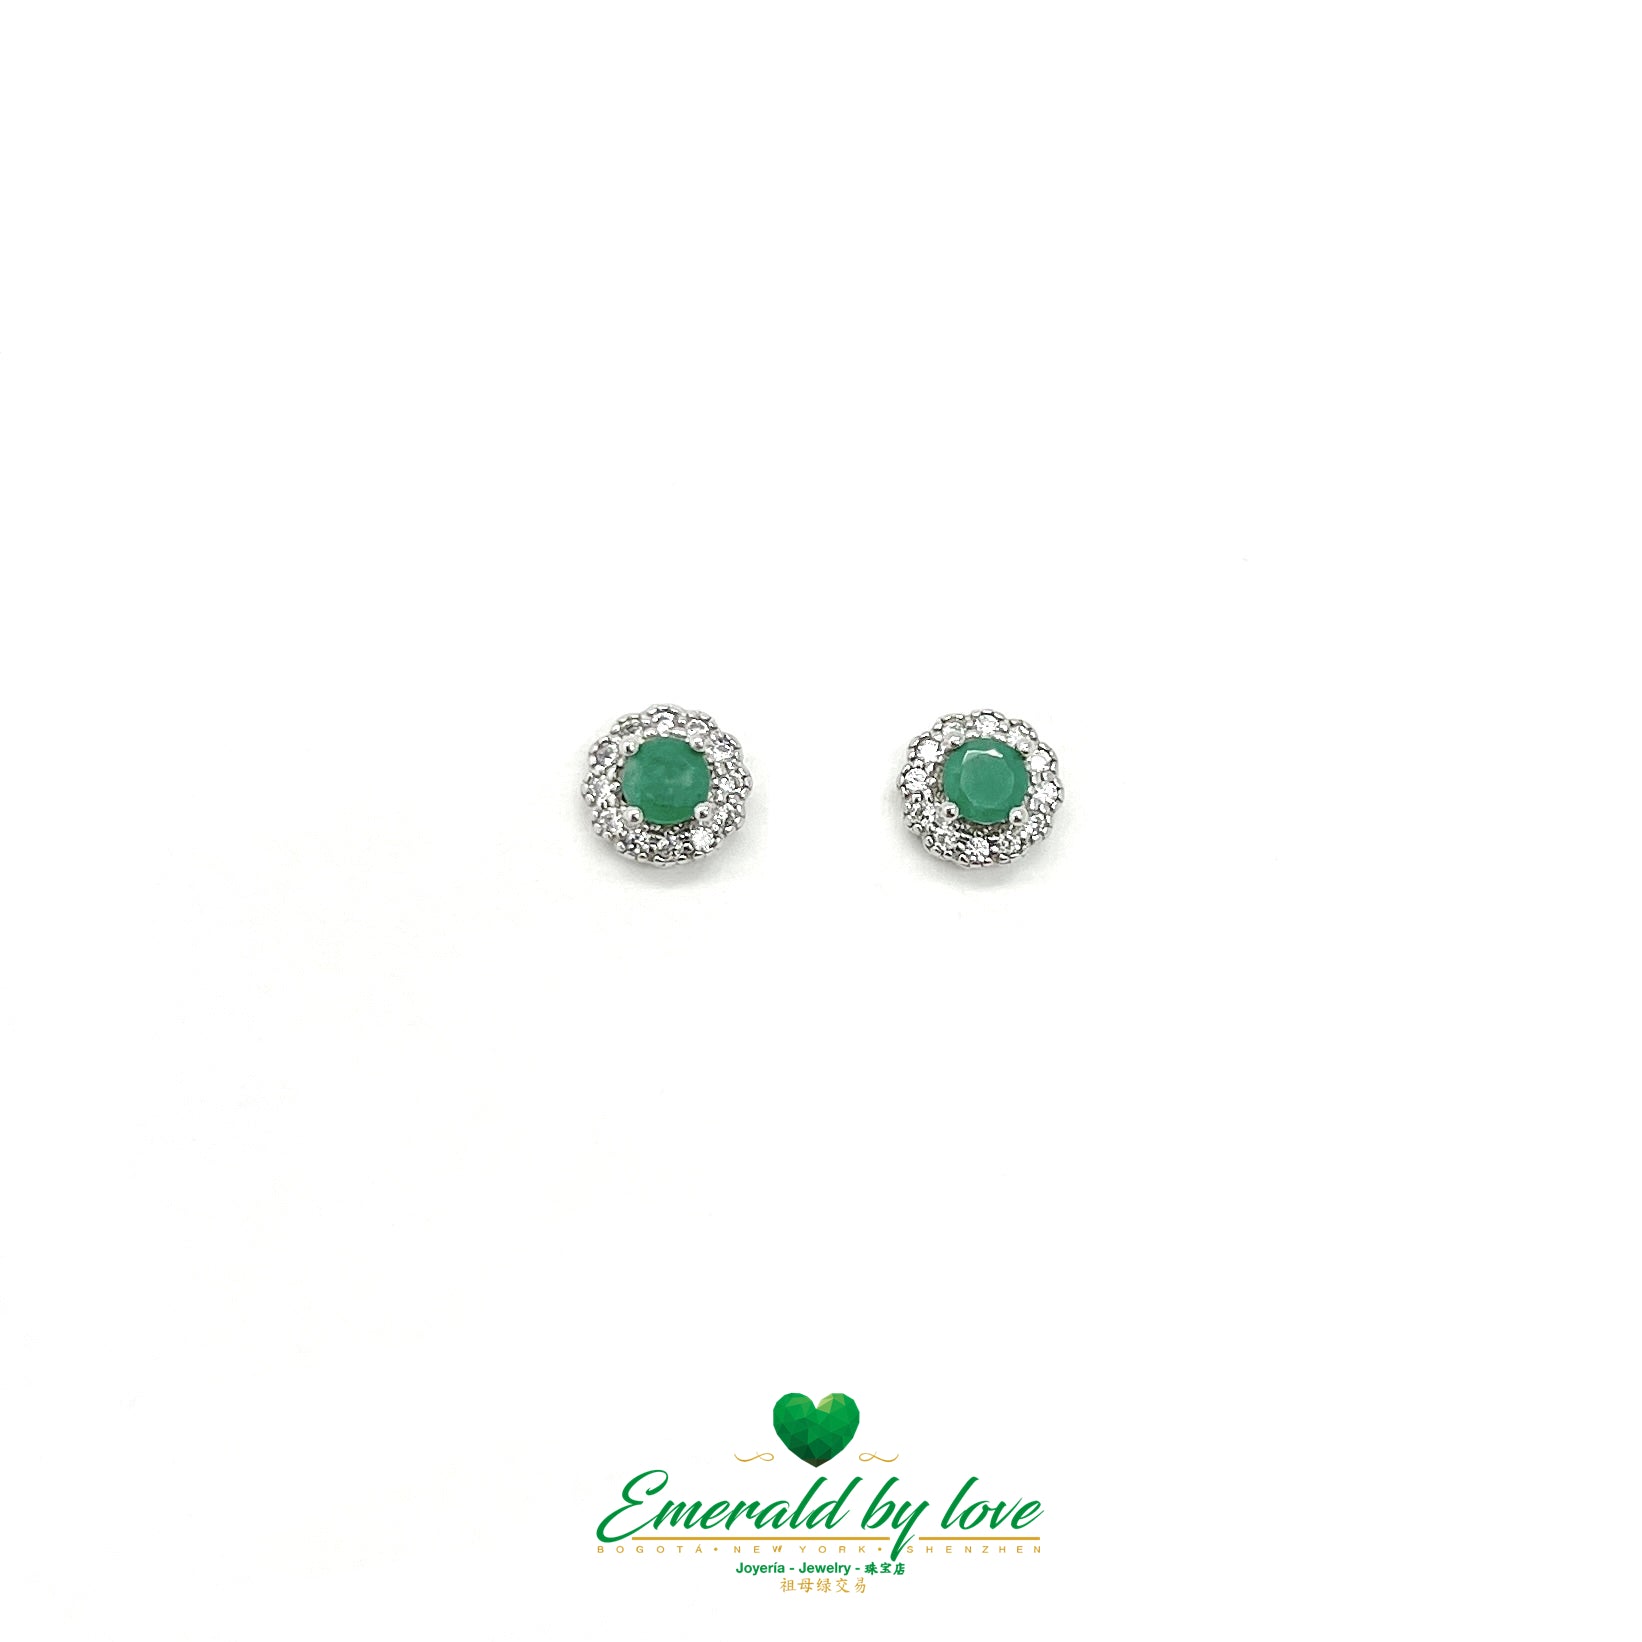 Round Floral Sterling Silver Earrings with Central Emerald